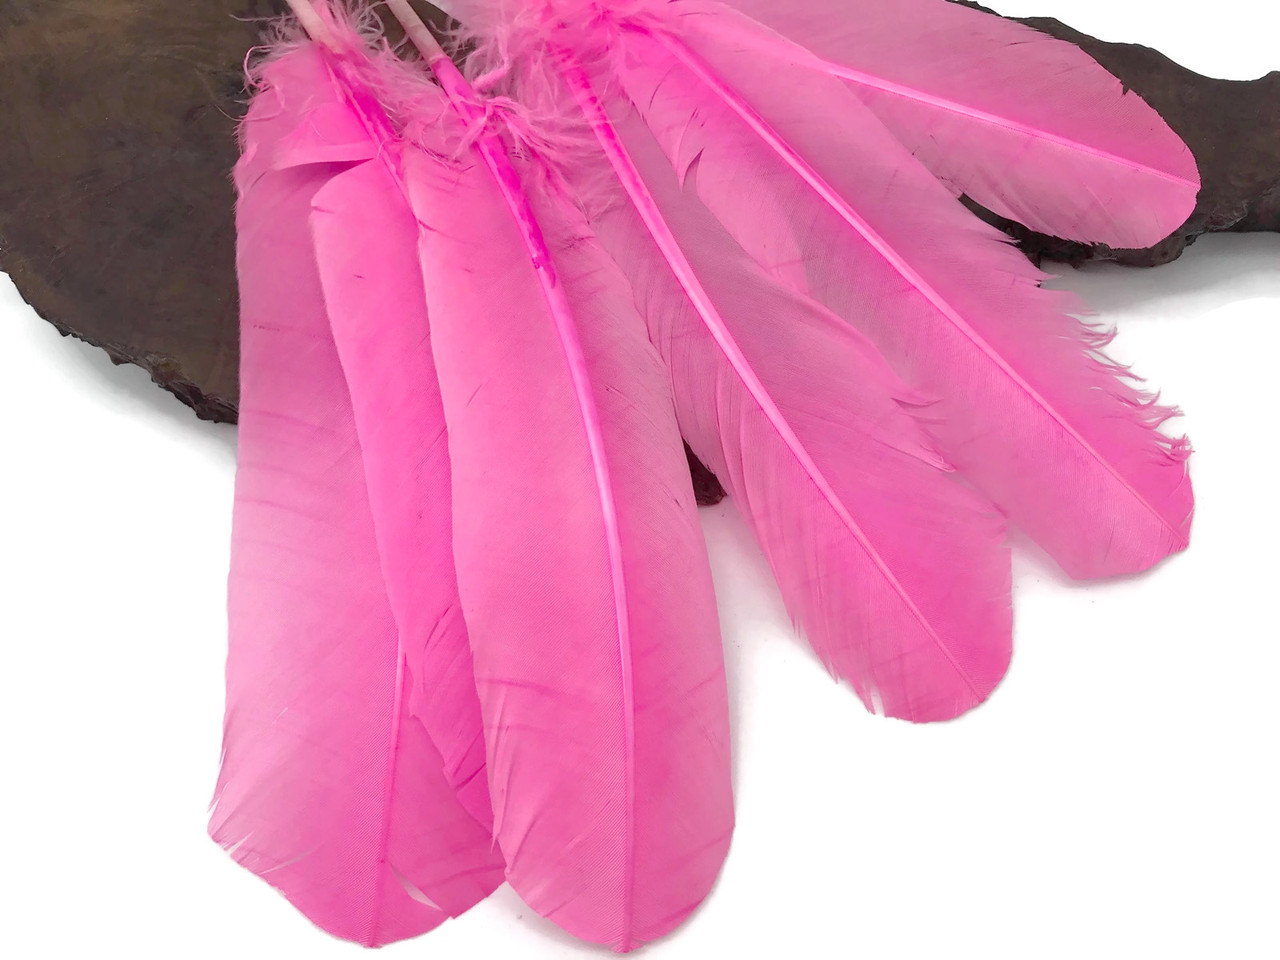 1 Lb. - Red Turkey Tom Rounds Secondary Wing Quill Wholesale Feathers (Bulk)